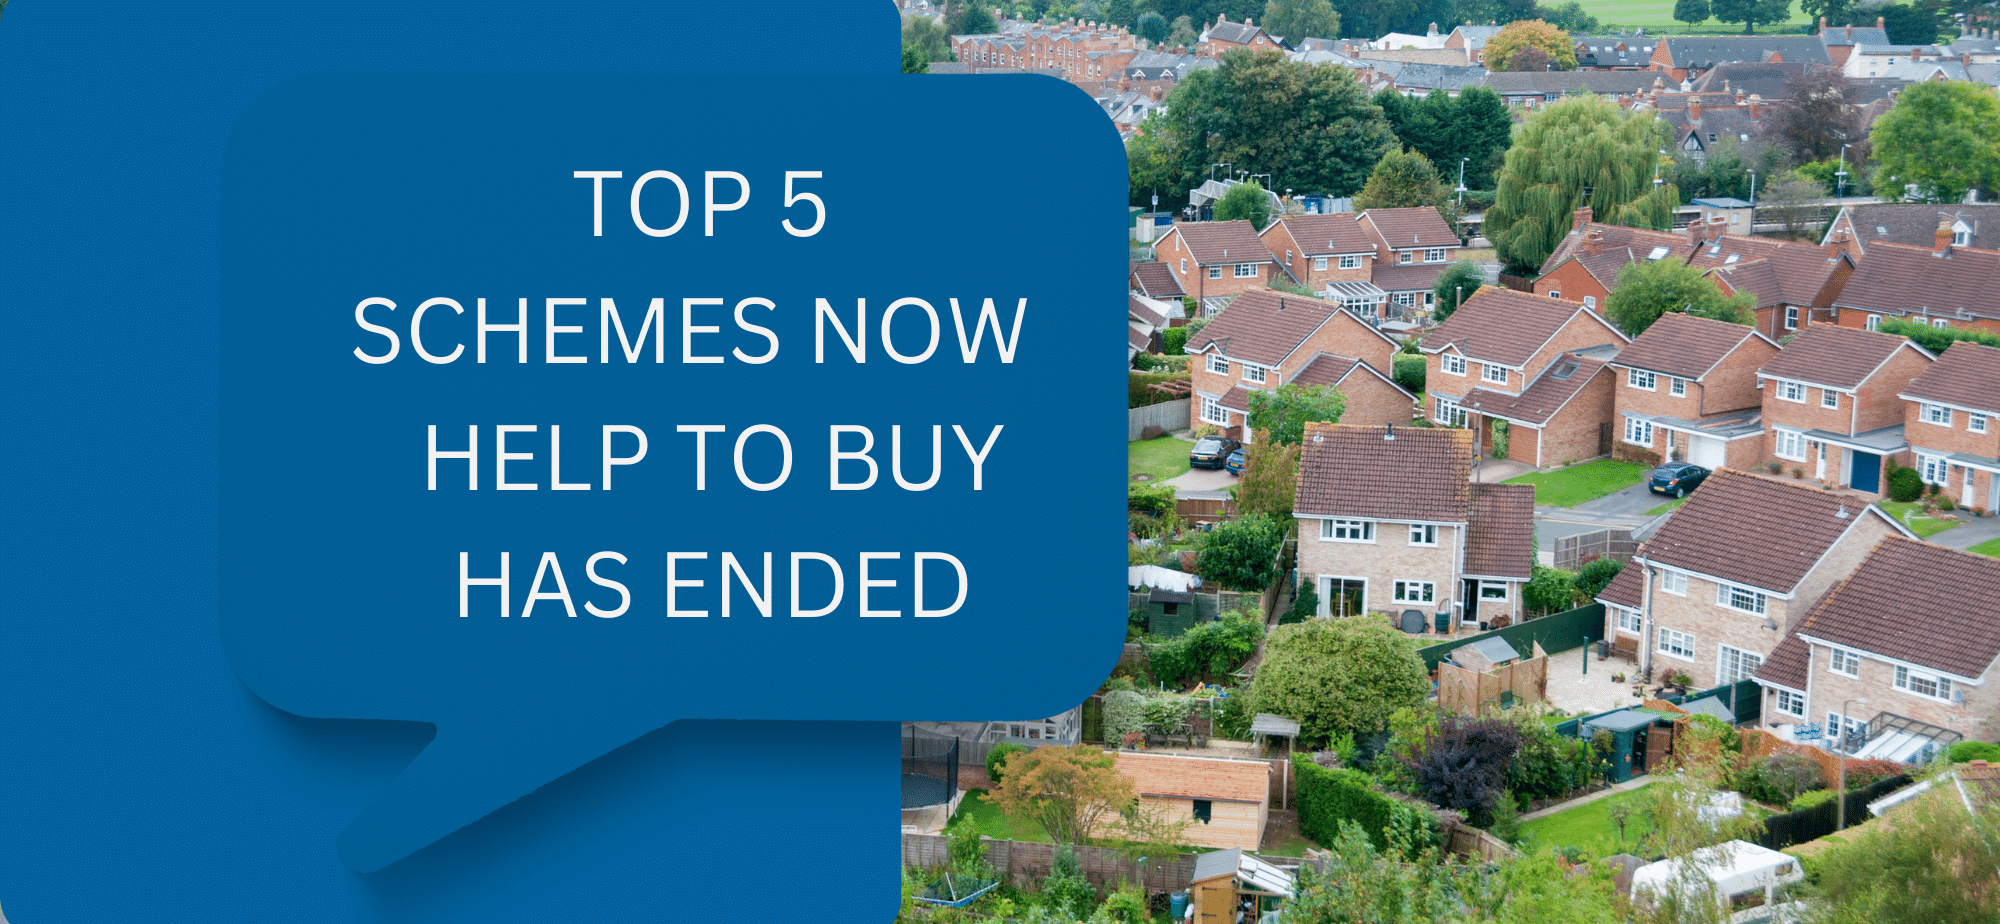 Top 5 schemes to use now Help to Buy has ended